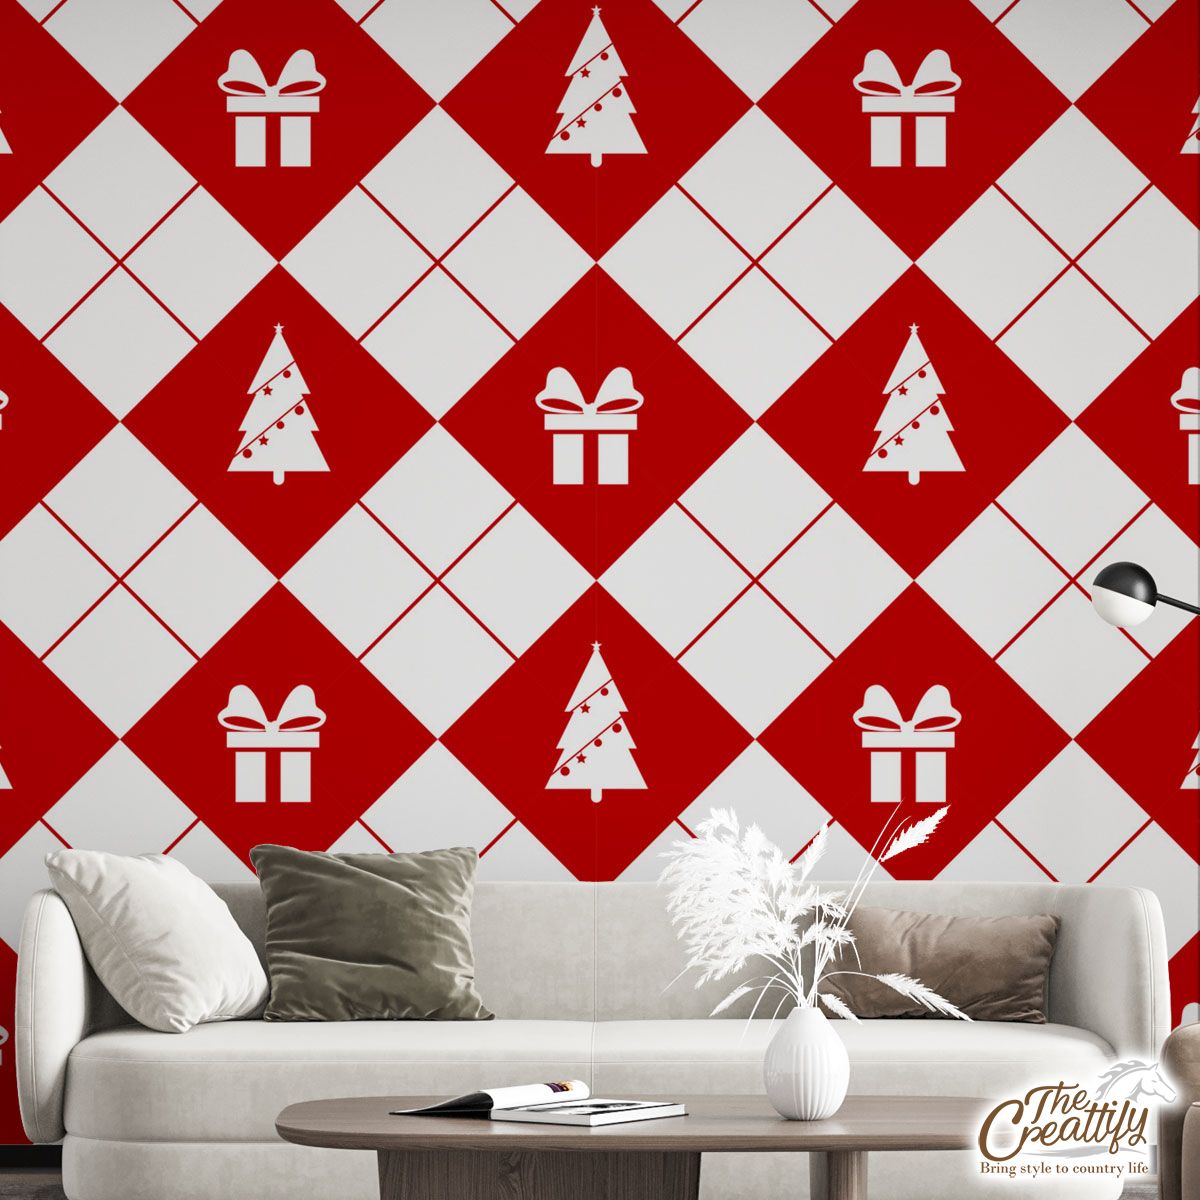 Christmas Gifts And Pine Tree Decorated With Lights On Red And White Background Wall Mural